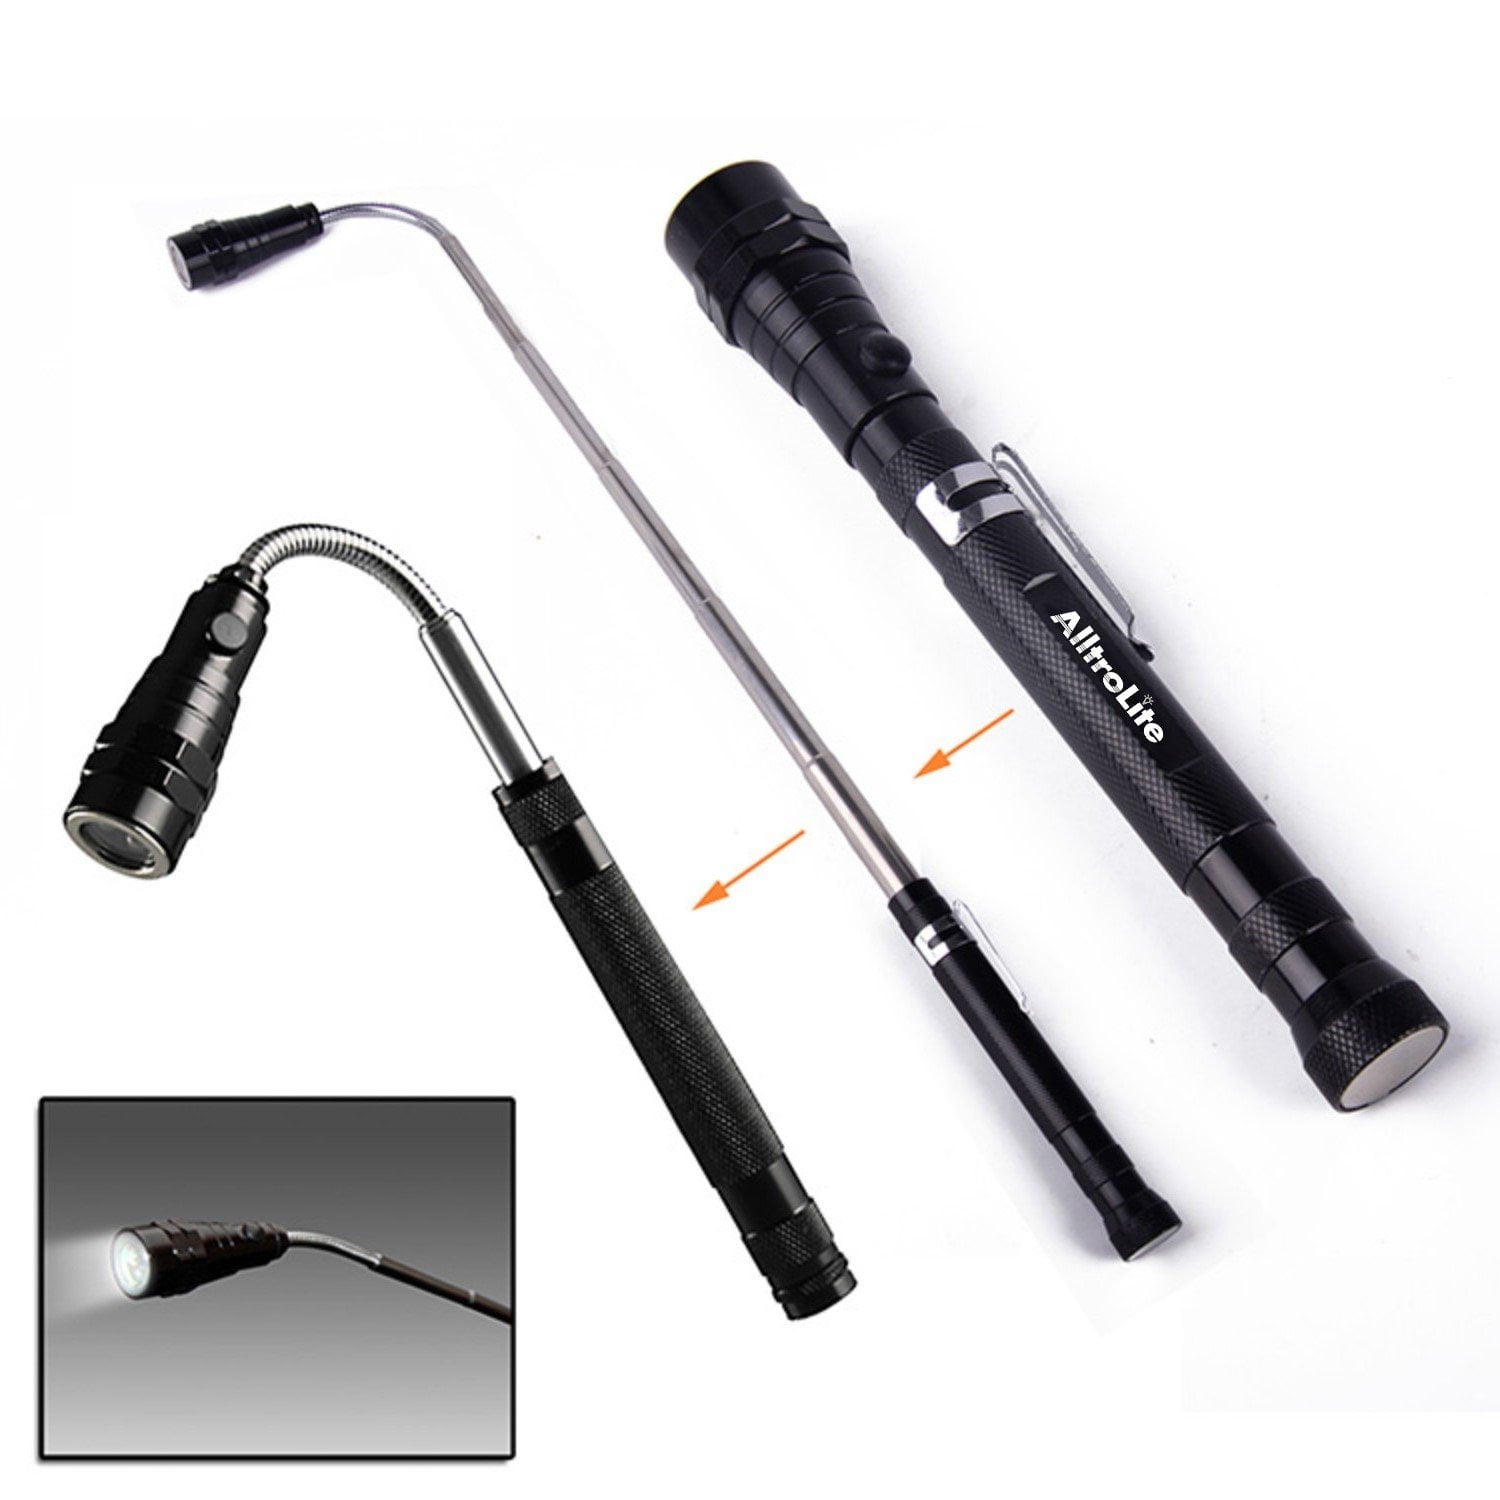 Details about   6 LED FLASHLIGHT WORK LIGHT WITH MAGNET BASE & POCKET CLIP WITH BATTERIES 3 PCS 